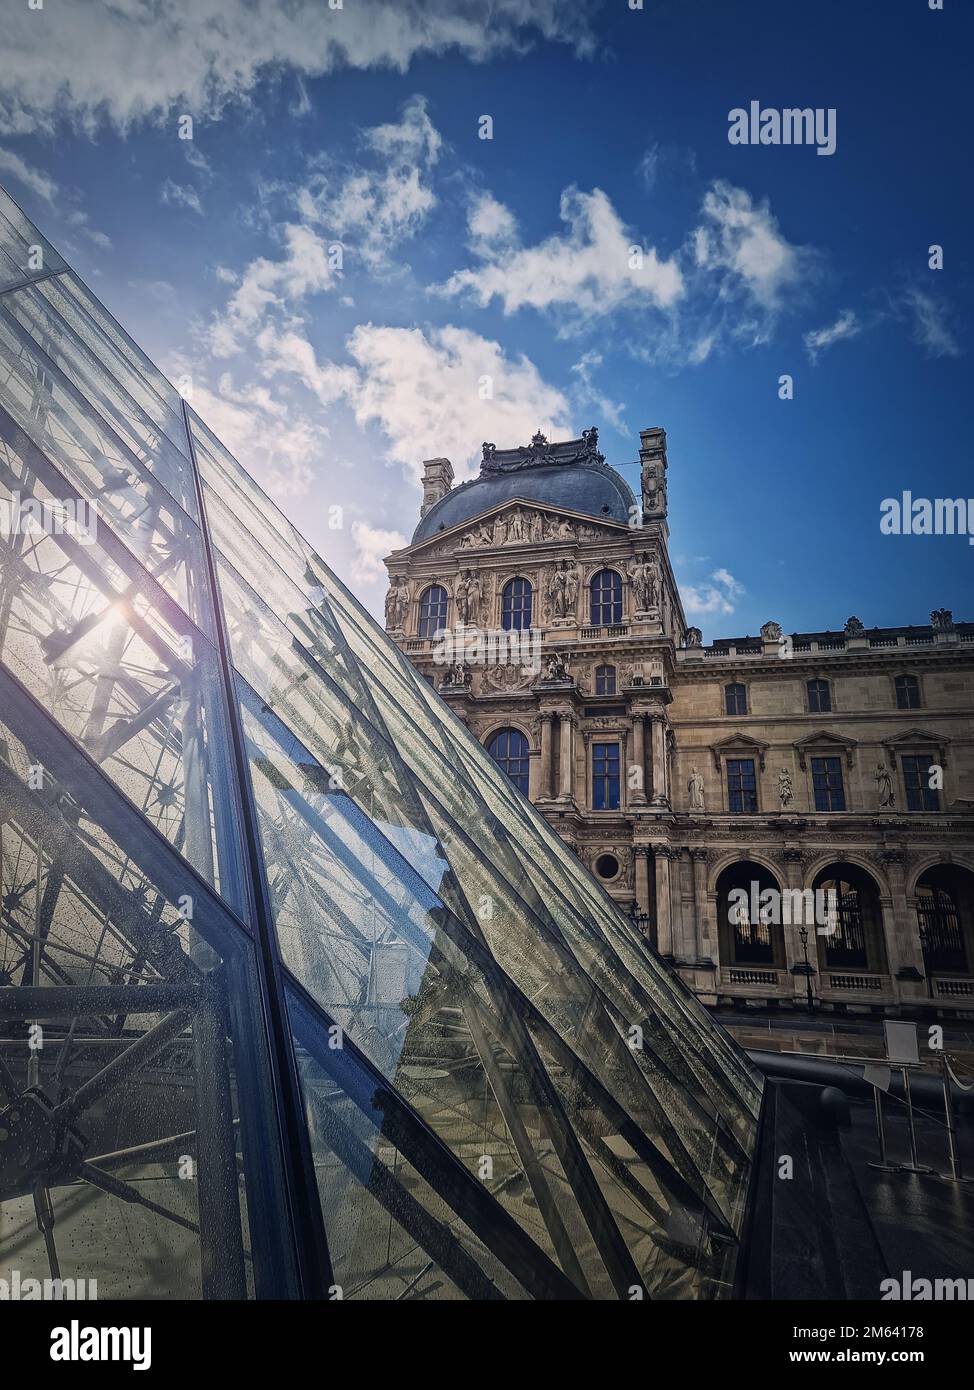 Outdoors view to the Louvre Museum in Paris, France. Vertical shot of the historical palace building with the modern glass pyramid in front Stock Photo